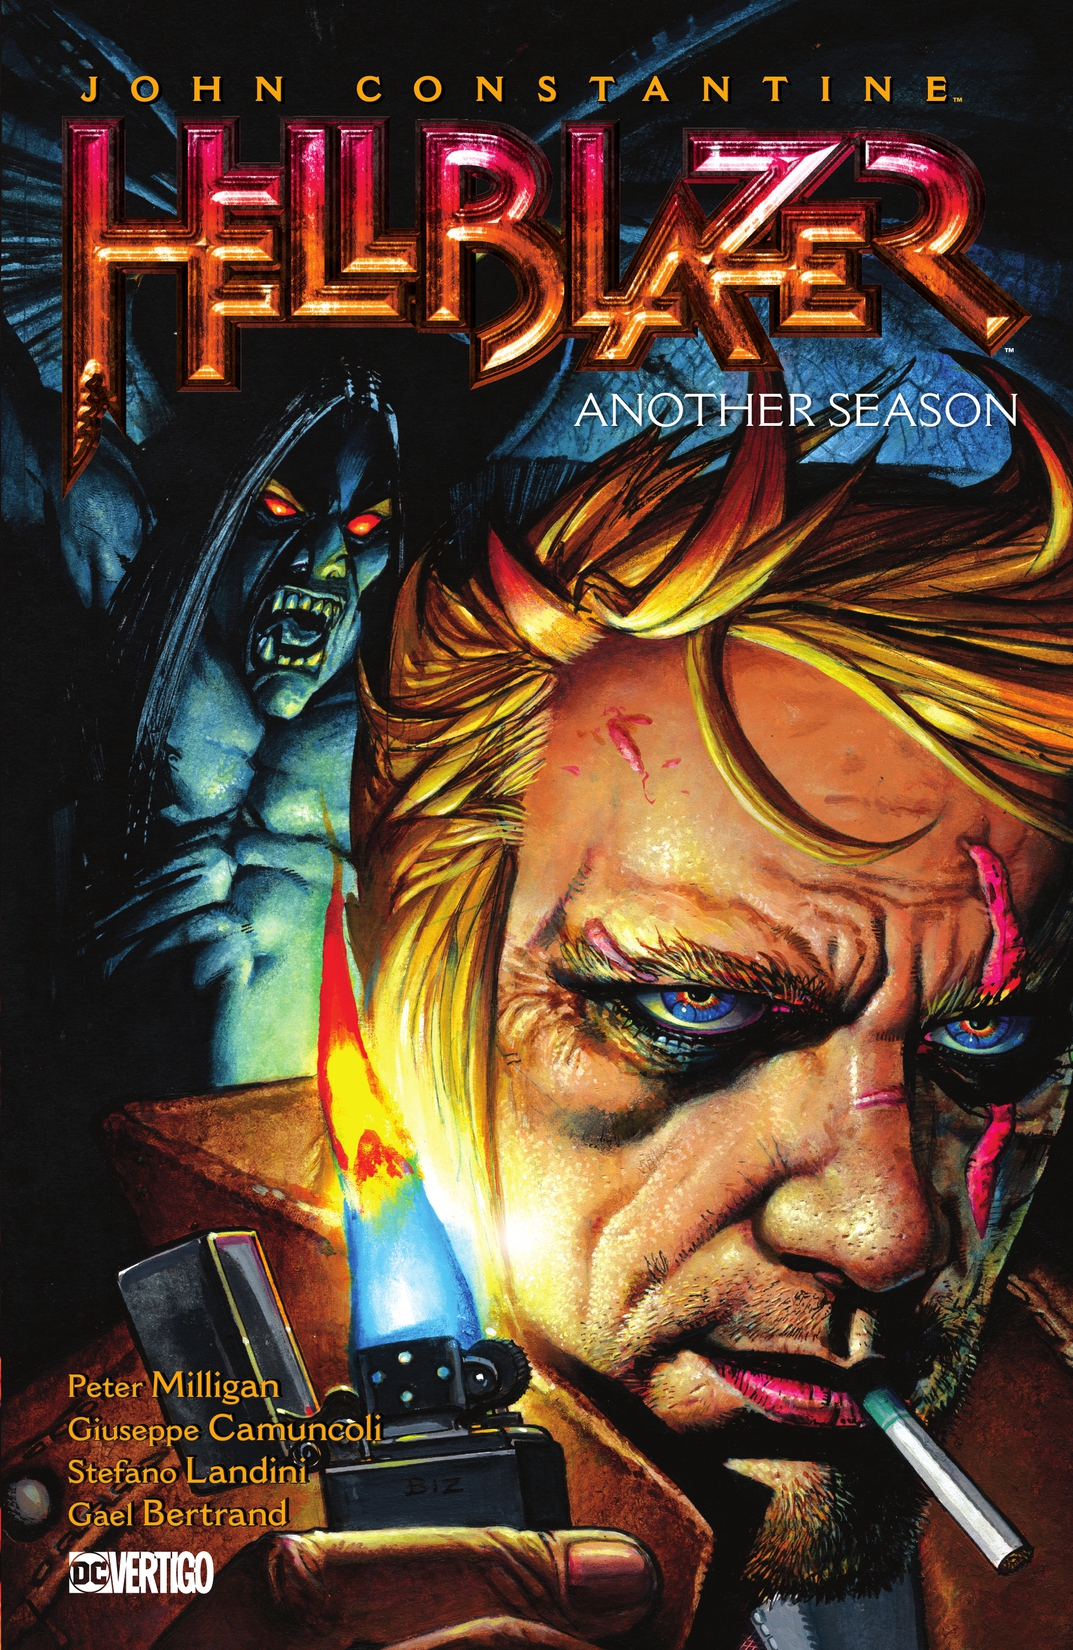 John Constantine, Hellblazer Vol. 25: Another Season preview images